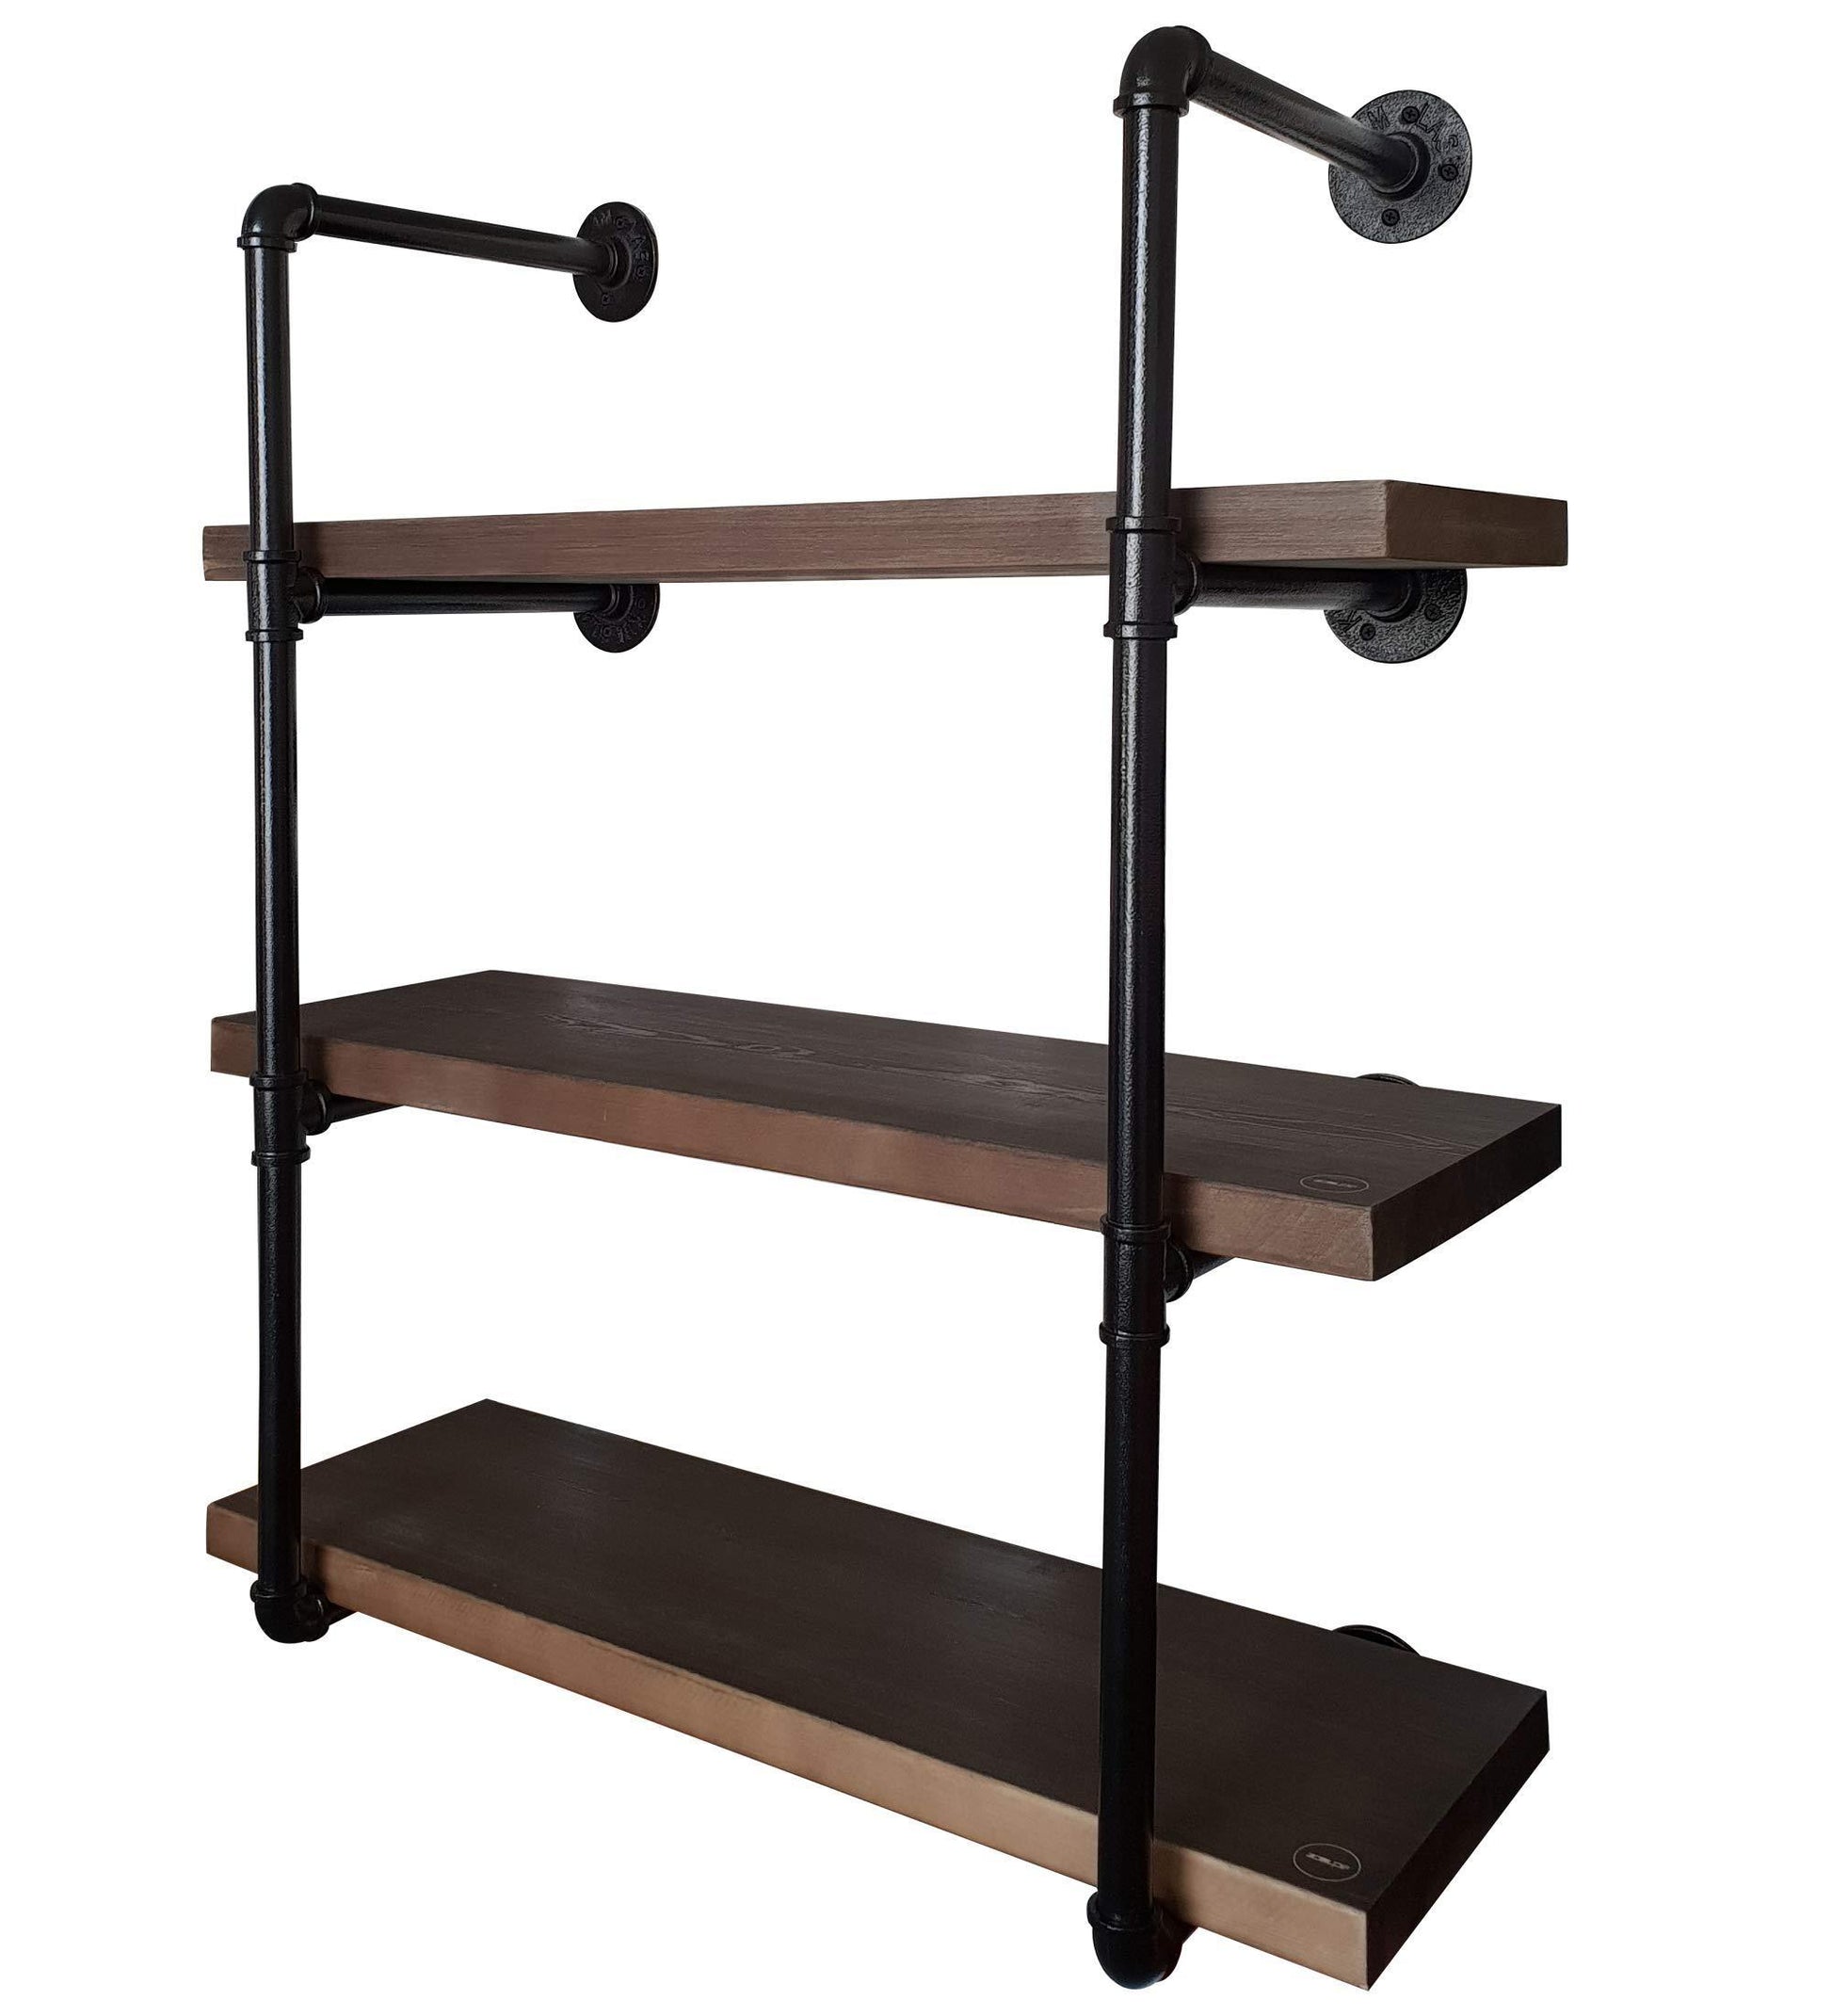 Heavy duty 2choice industrial pipe shelving rustic shelves solid canadian wood vintage sleek pipe shelves for floating bookshelf kitchen living room versatile home decor wall mounted storage 3 tier